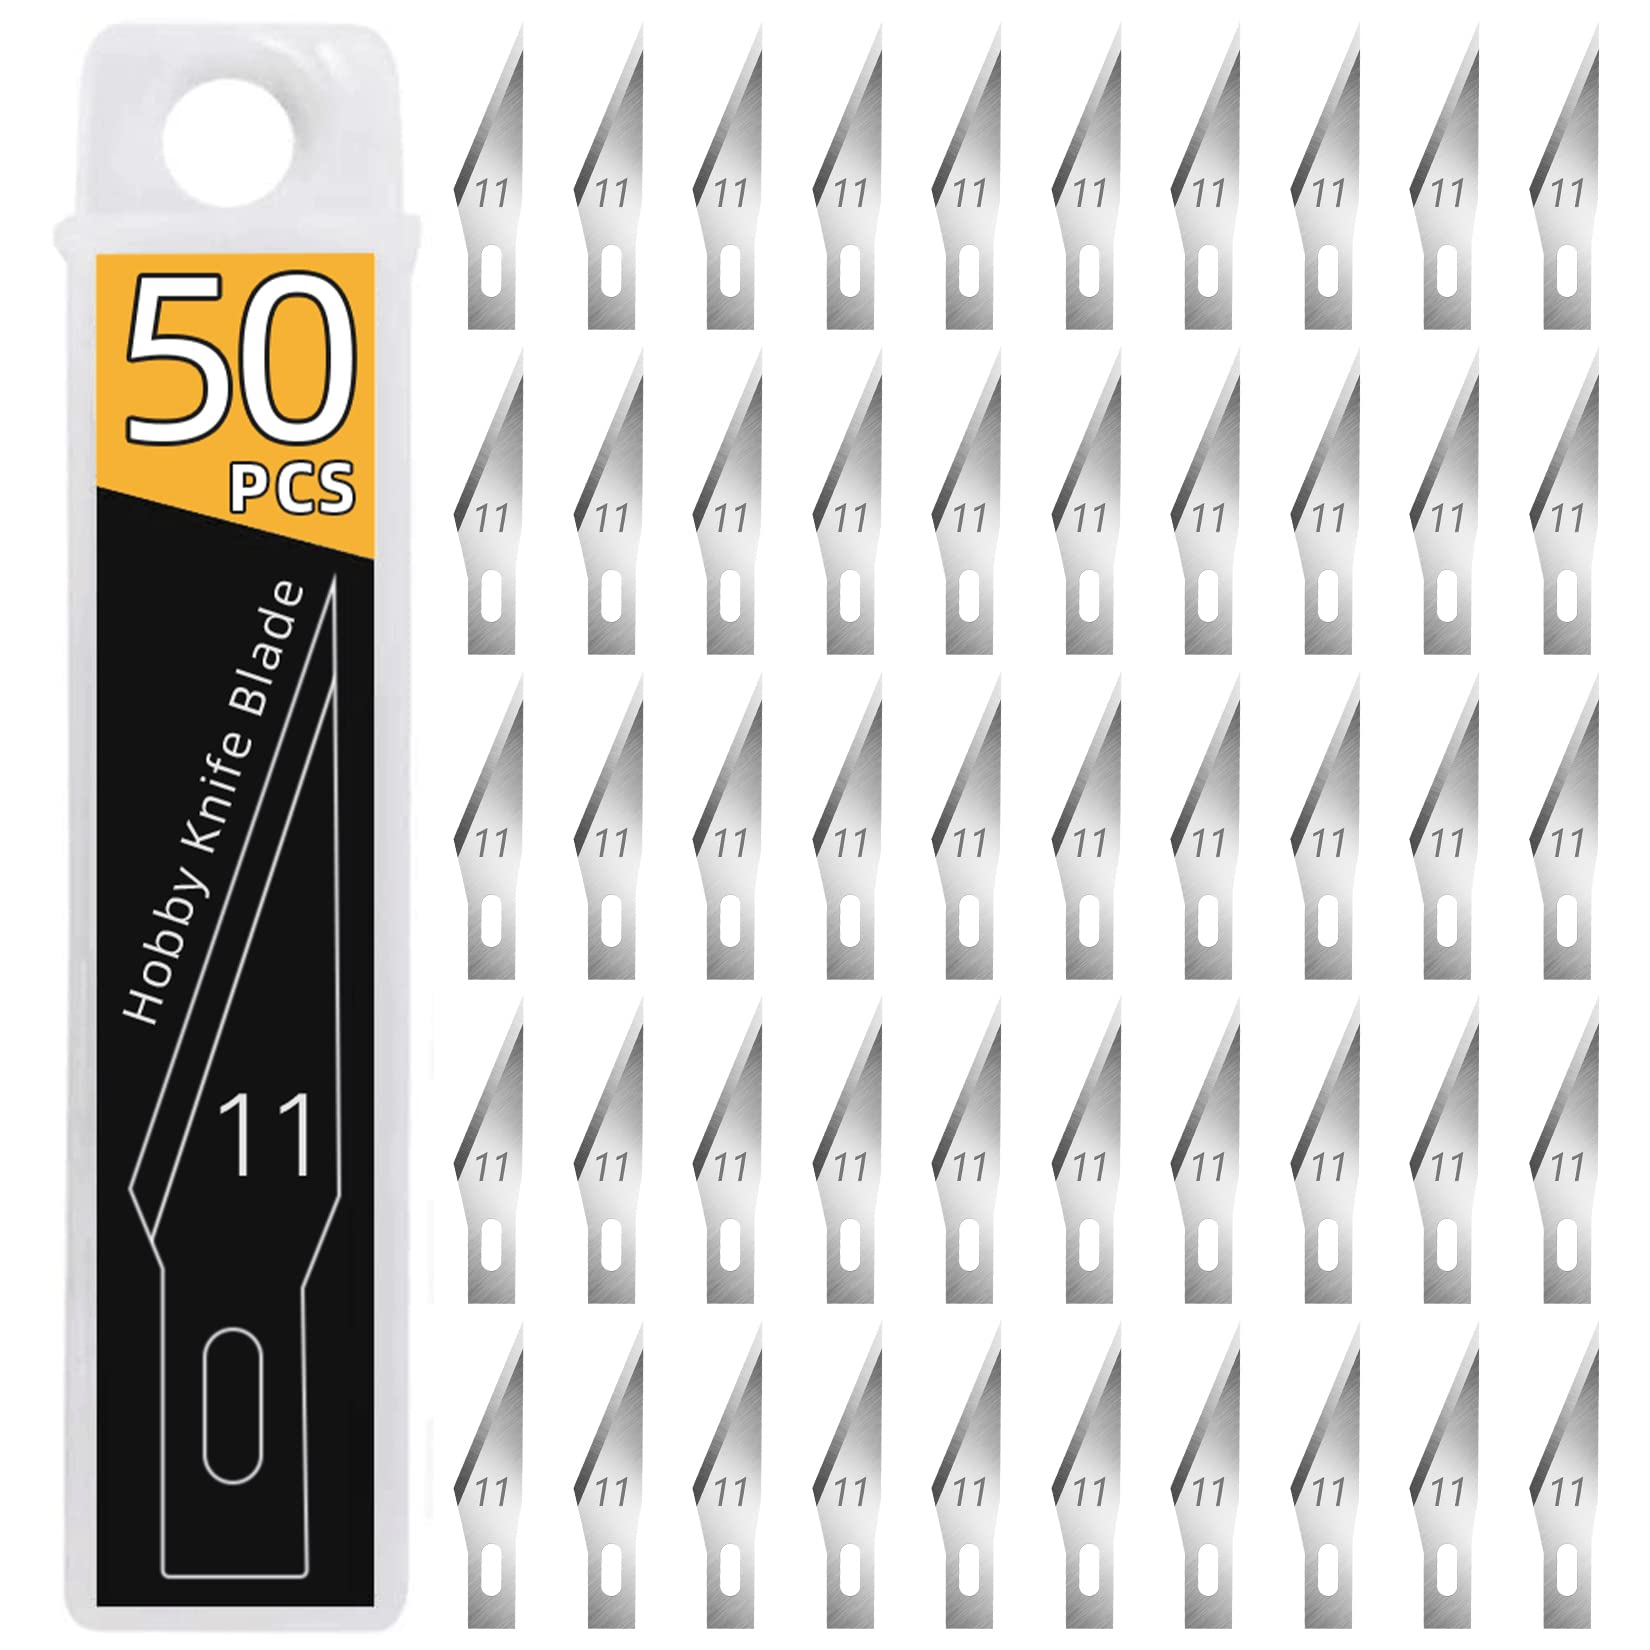 DIYSELF 50 PCS Exacto Knife Blades, High Carbon Steel #11 Refill Exacto Art  Blades Cutting Tool with Storage Case for Craft, Hobby